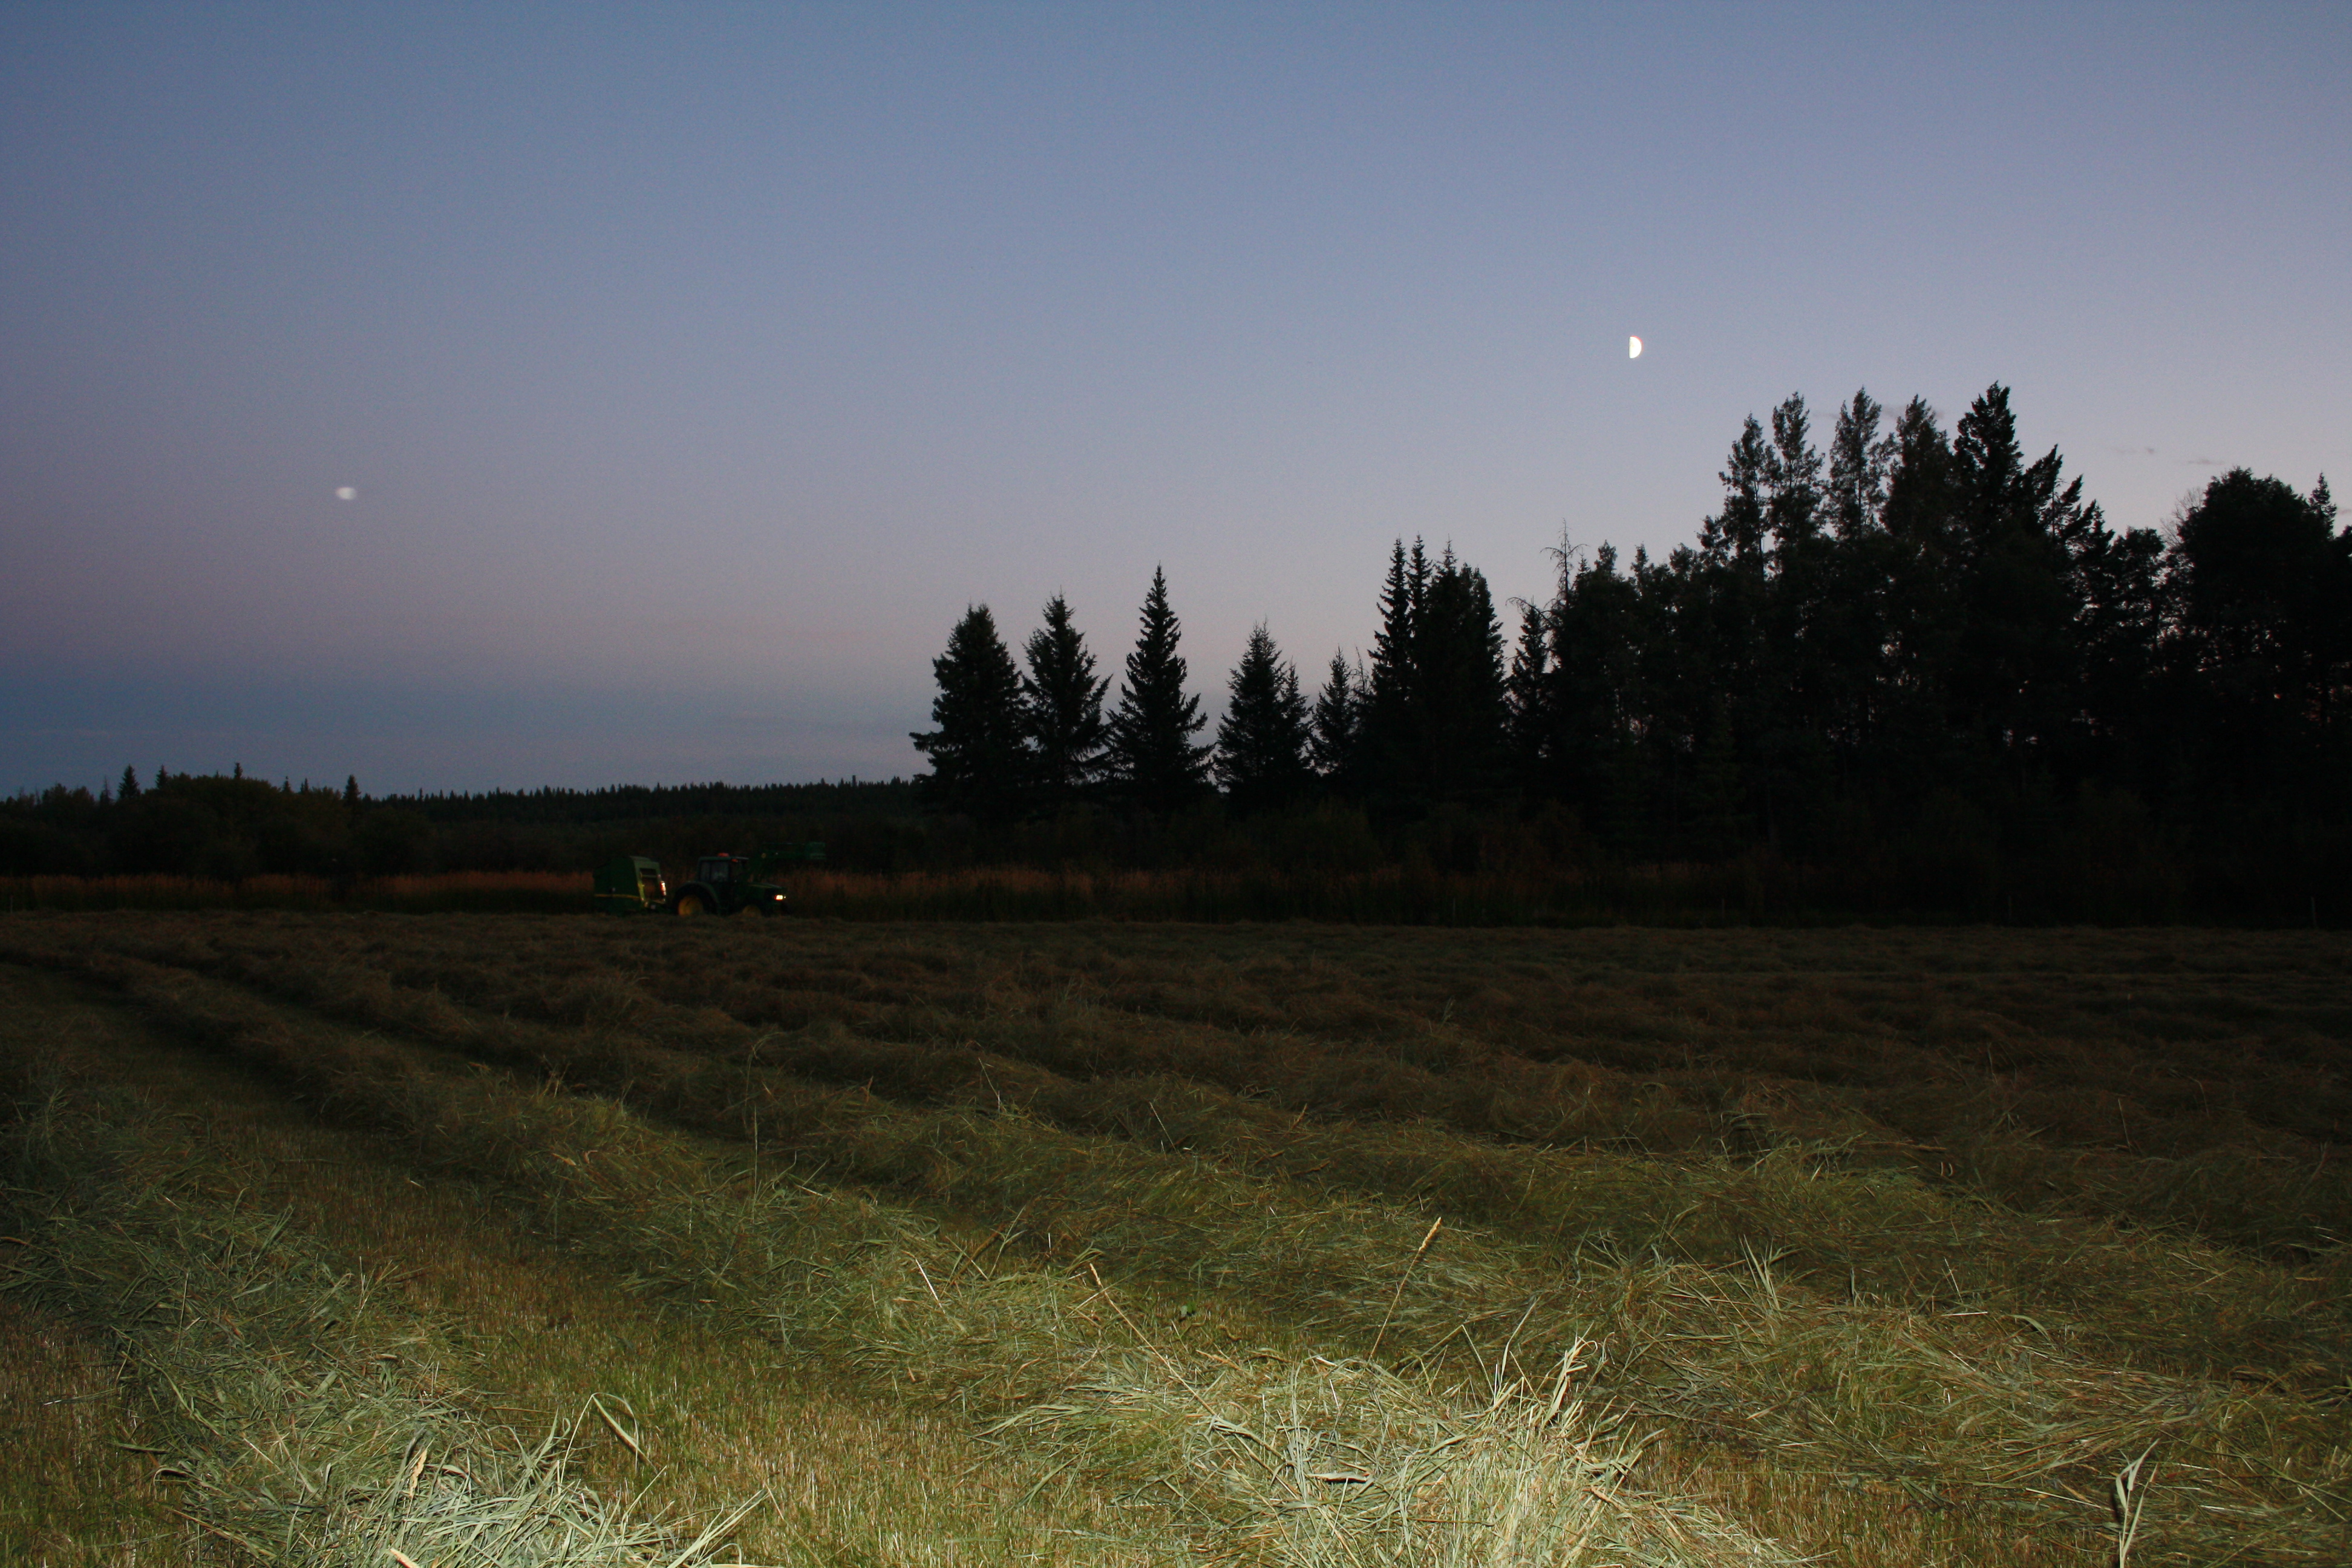 Working under the light of a new moon.  Look at those thick, tall windrows I'm baling!